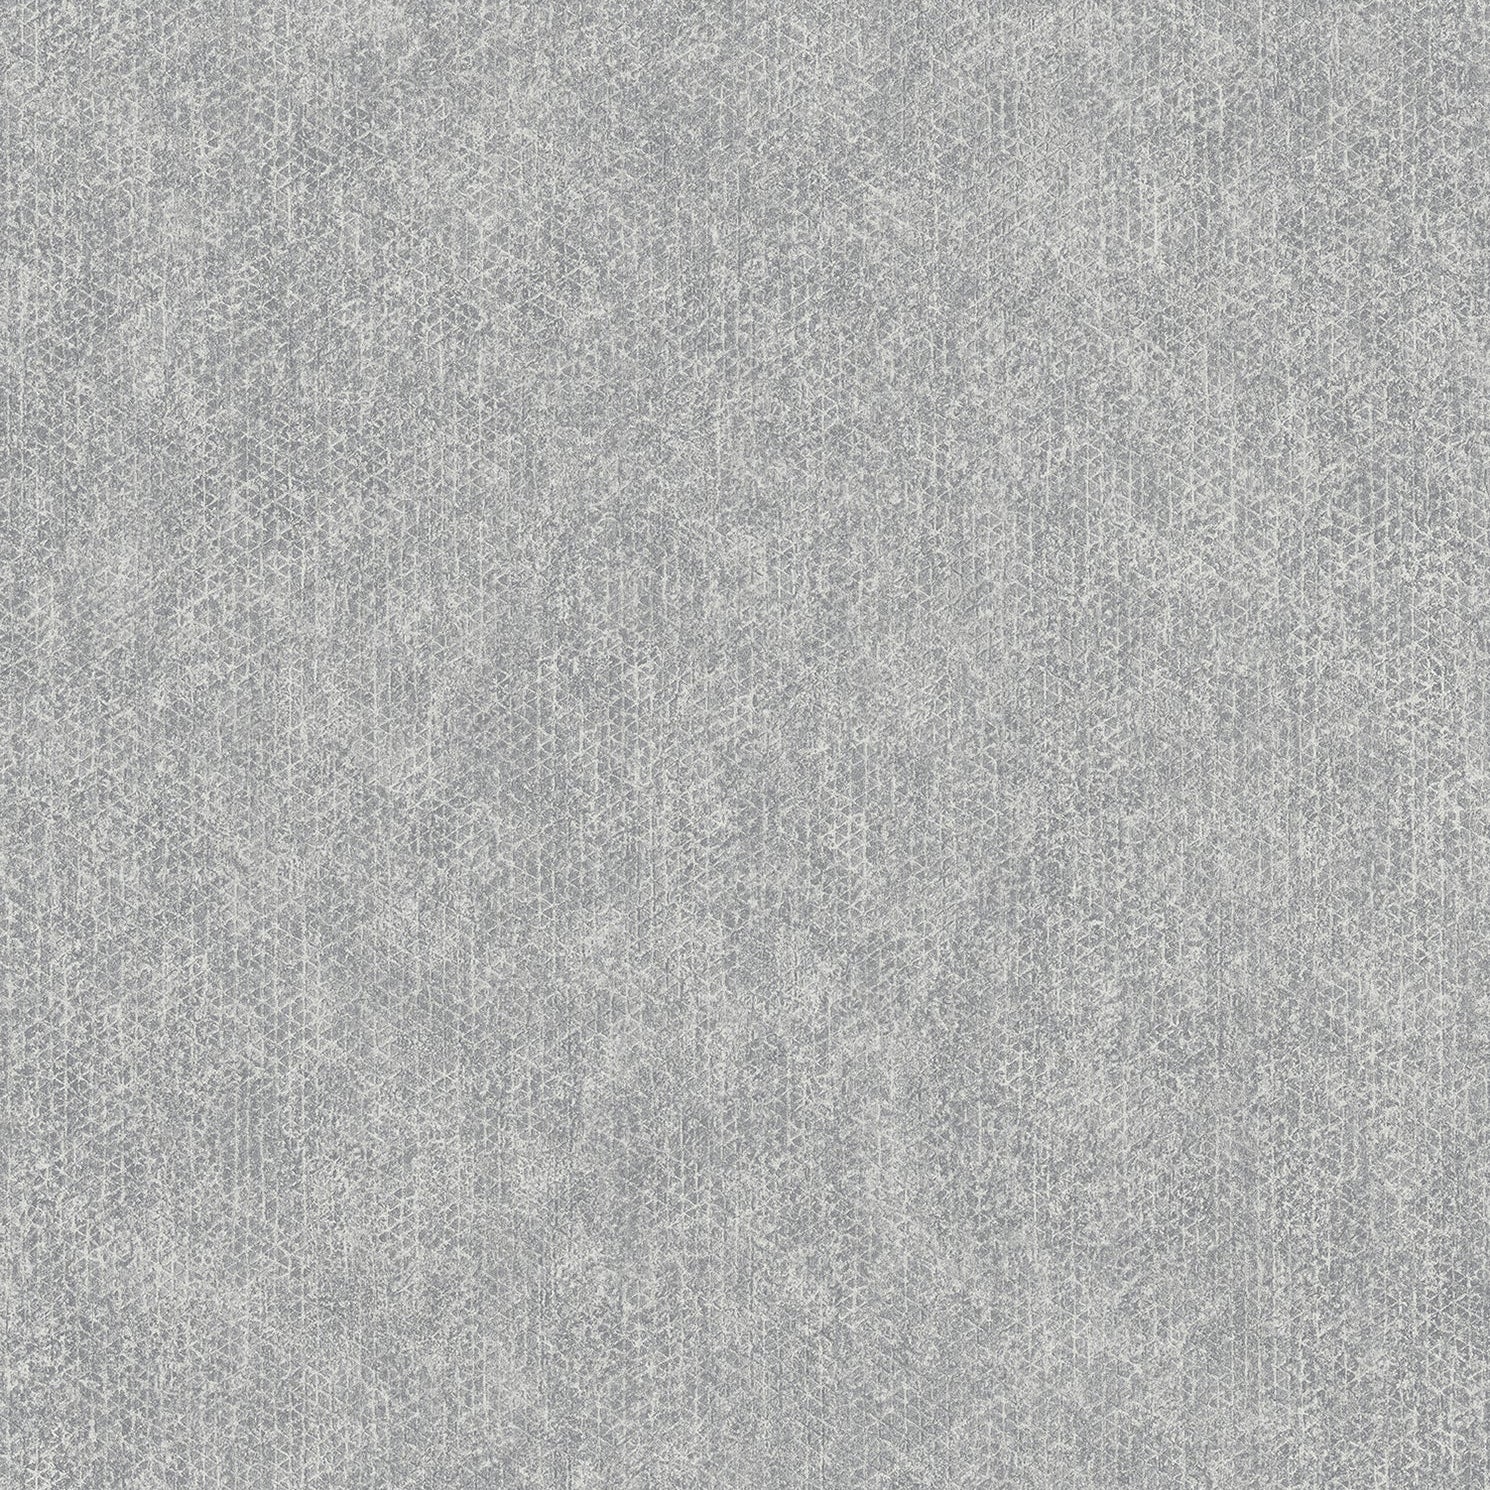 Acquire 4020-75339 Geo & Textures Everett Silver Distressed Textural Silver by Advantage